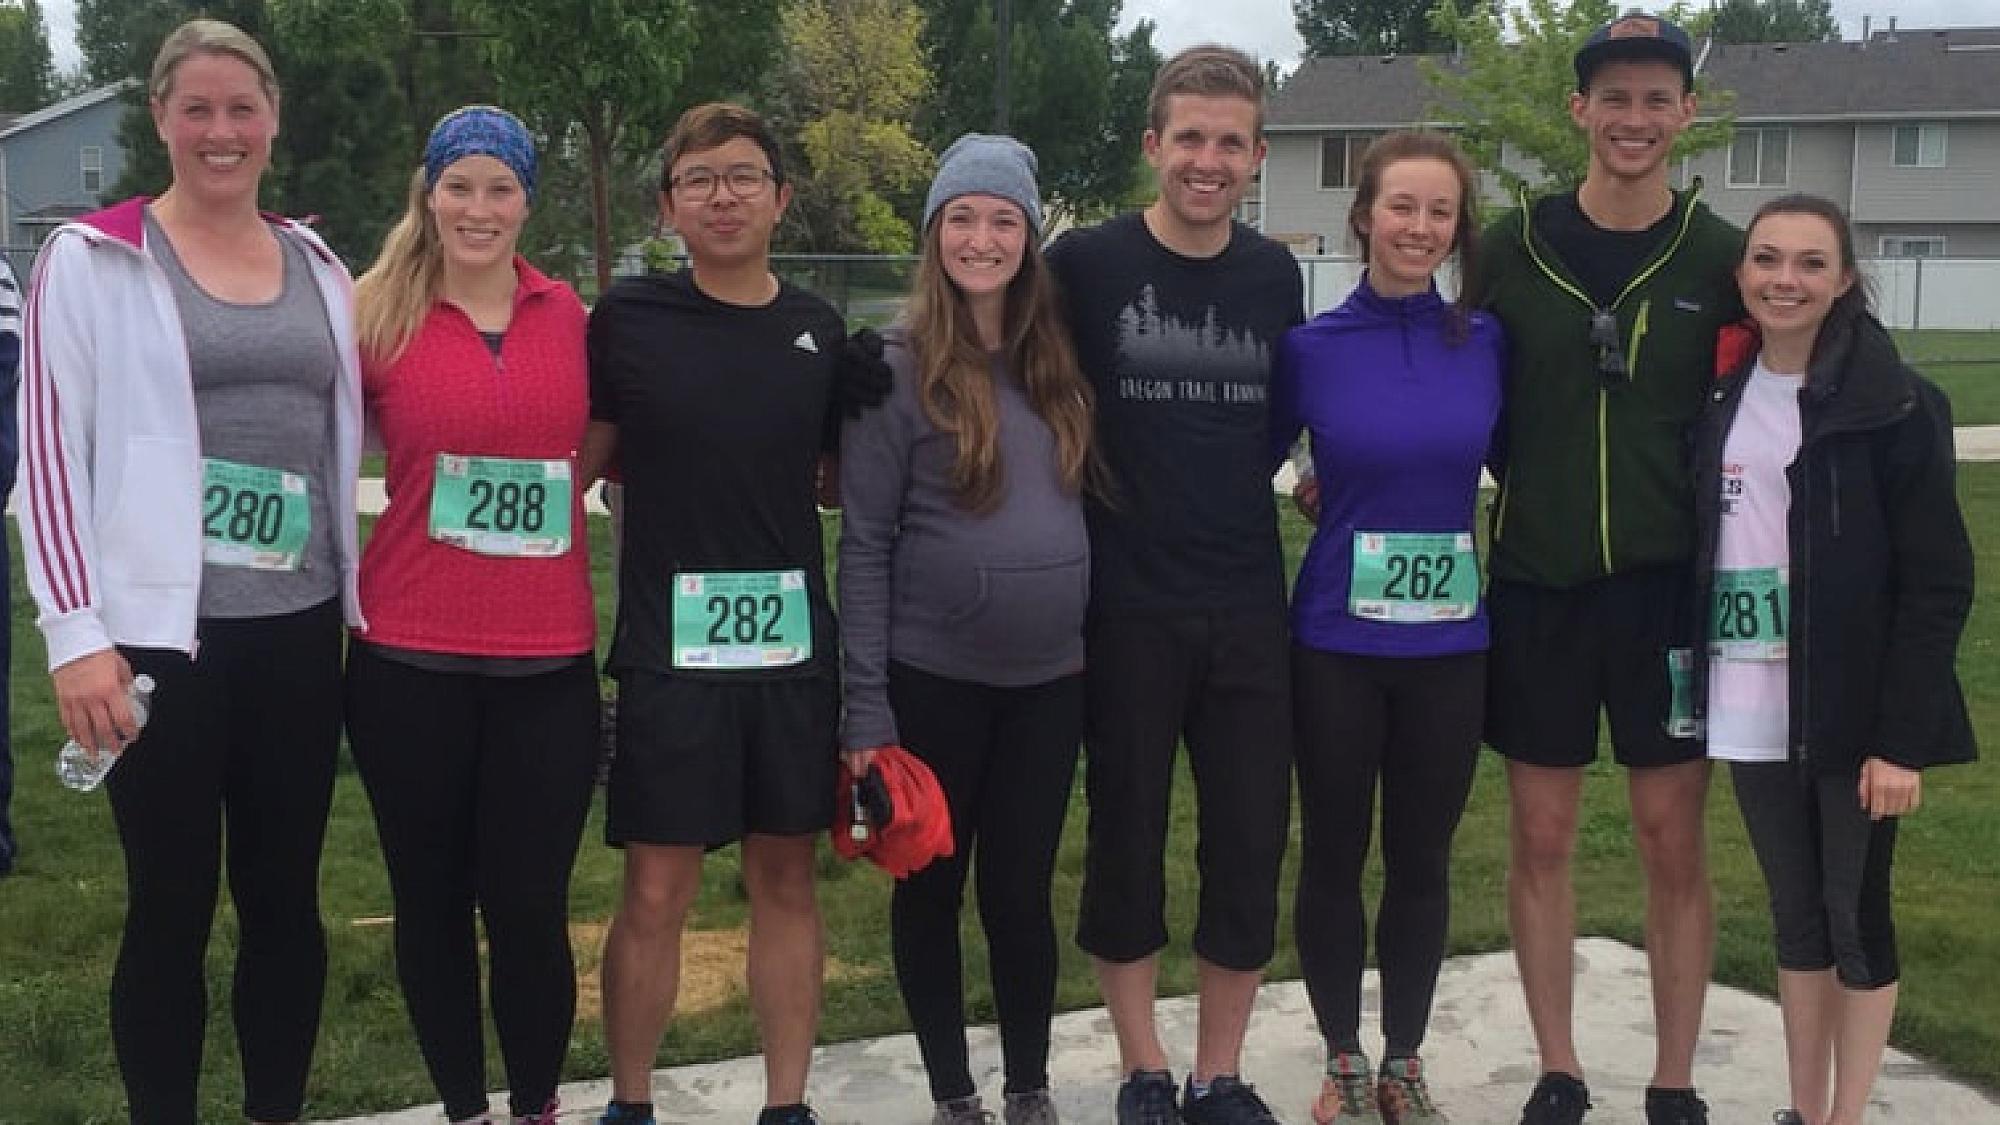 Research Assistants participated in the 5K run